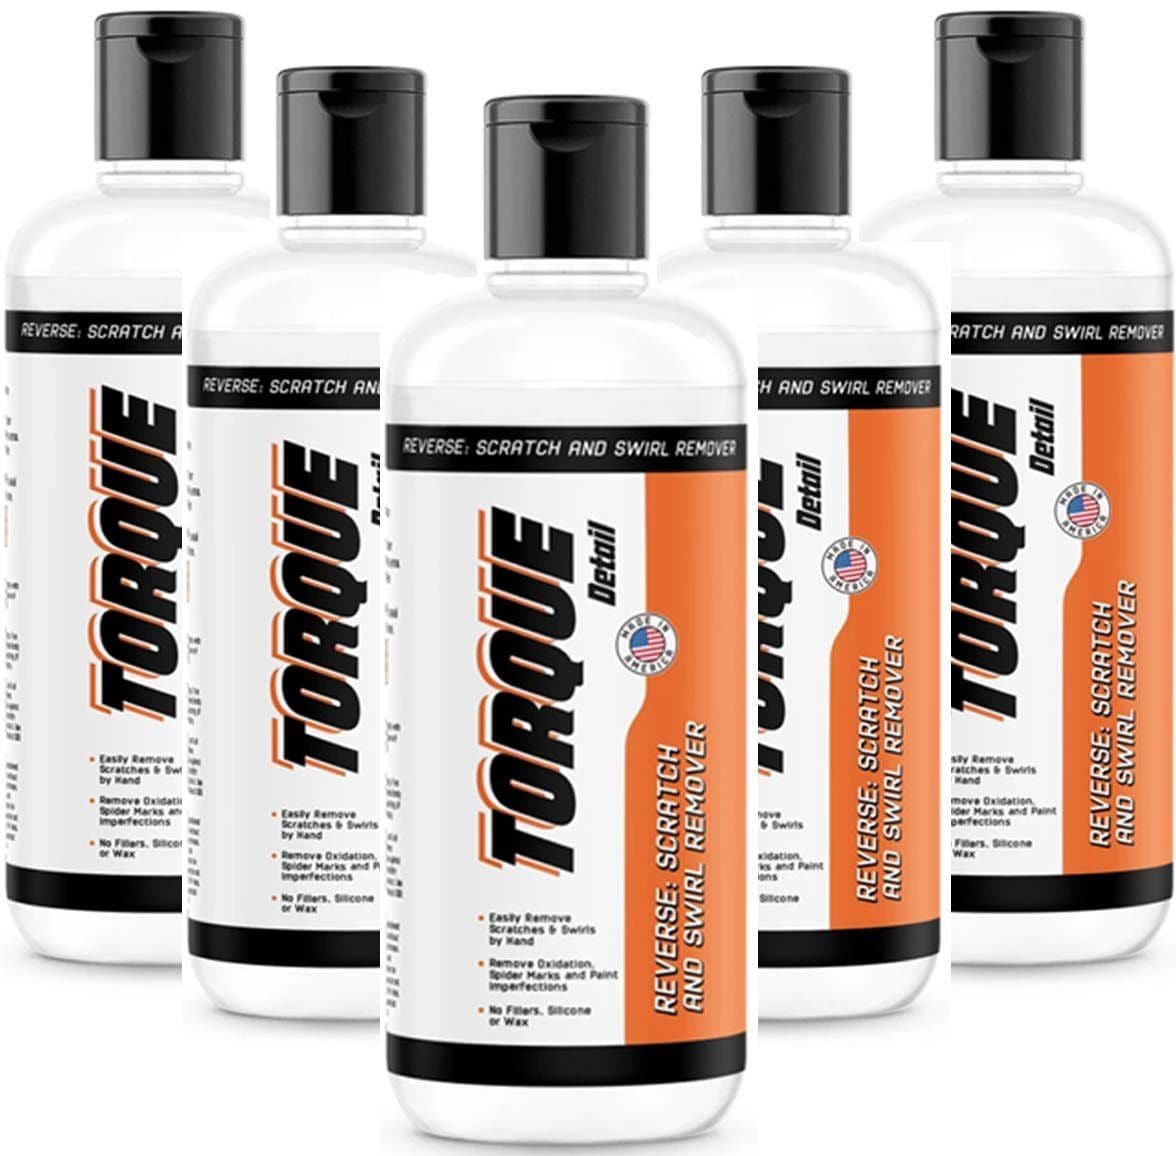 Reverse: Car Scratch Remover, Water Spot Remover & Swirl Repair -  All-In-One Paint Correction Compound (4oz Bottle), Torque Detail